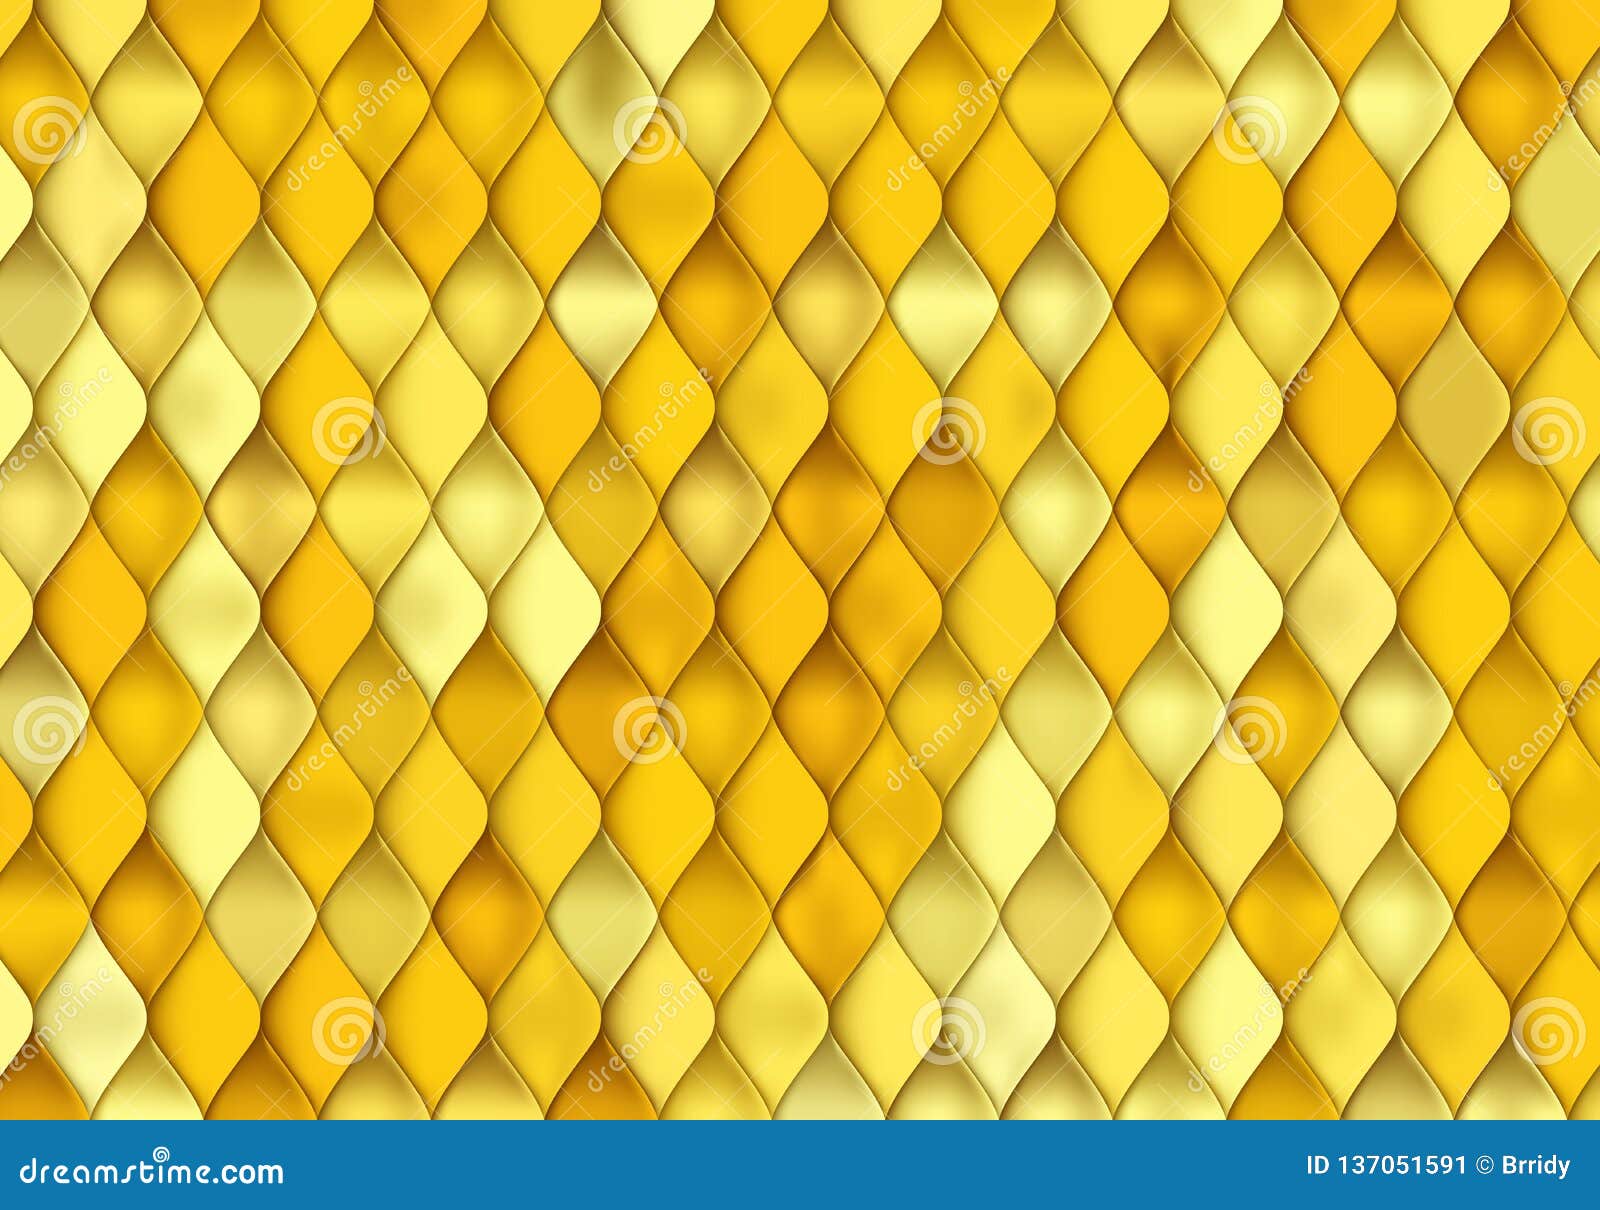 https://thumbs.dreamstime.com/z/gold-fish-scale-texture-vector-golden-background-yellow-reptile-skin-137051591.jpg